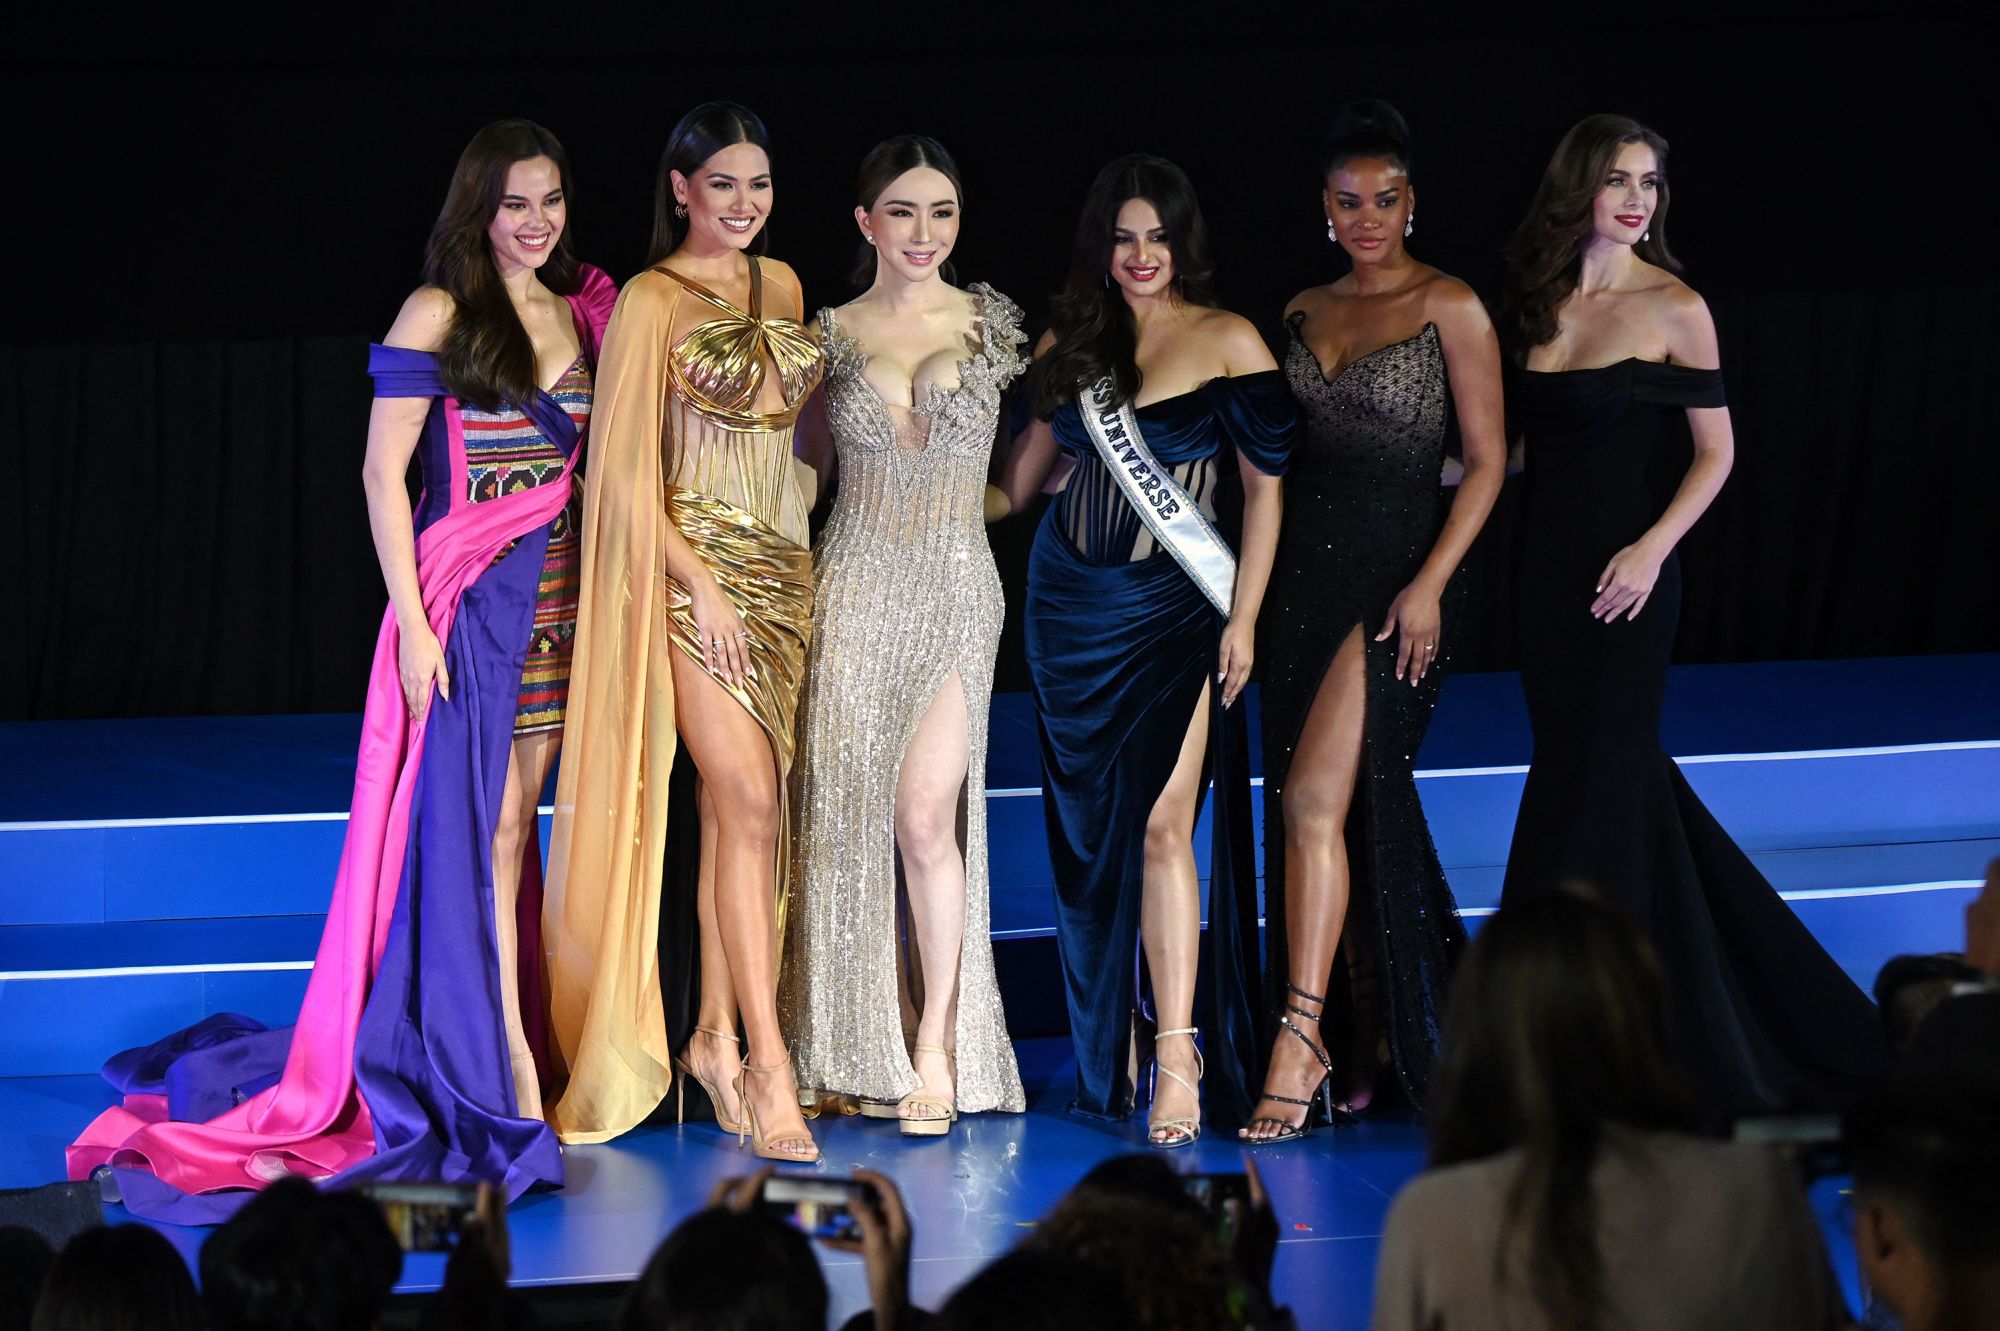 (L-R) Miss Universe 2018 Catriona Gray, Miss Universe 2020 Andrea Meza, CEO of JKN Global Group Jakapong Anne Jakrajutatip, Miss Universe 2021 Harnaaz Sandhu, Miss Universe 2011 Leila Lopes and Miss Universe 2005 Natalie Glebova stand on stage together during the Miss Universe Extravaganza, after JKNs acquisition of the Miss Universe franchise, in Bangkok on November 7, 2022. (Photo by Lillian SUWANRUMPHA / AFP) (Photo by LILLIAN SUWANRUMPHA/AFP via Getty Images)